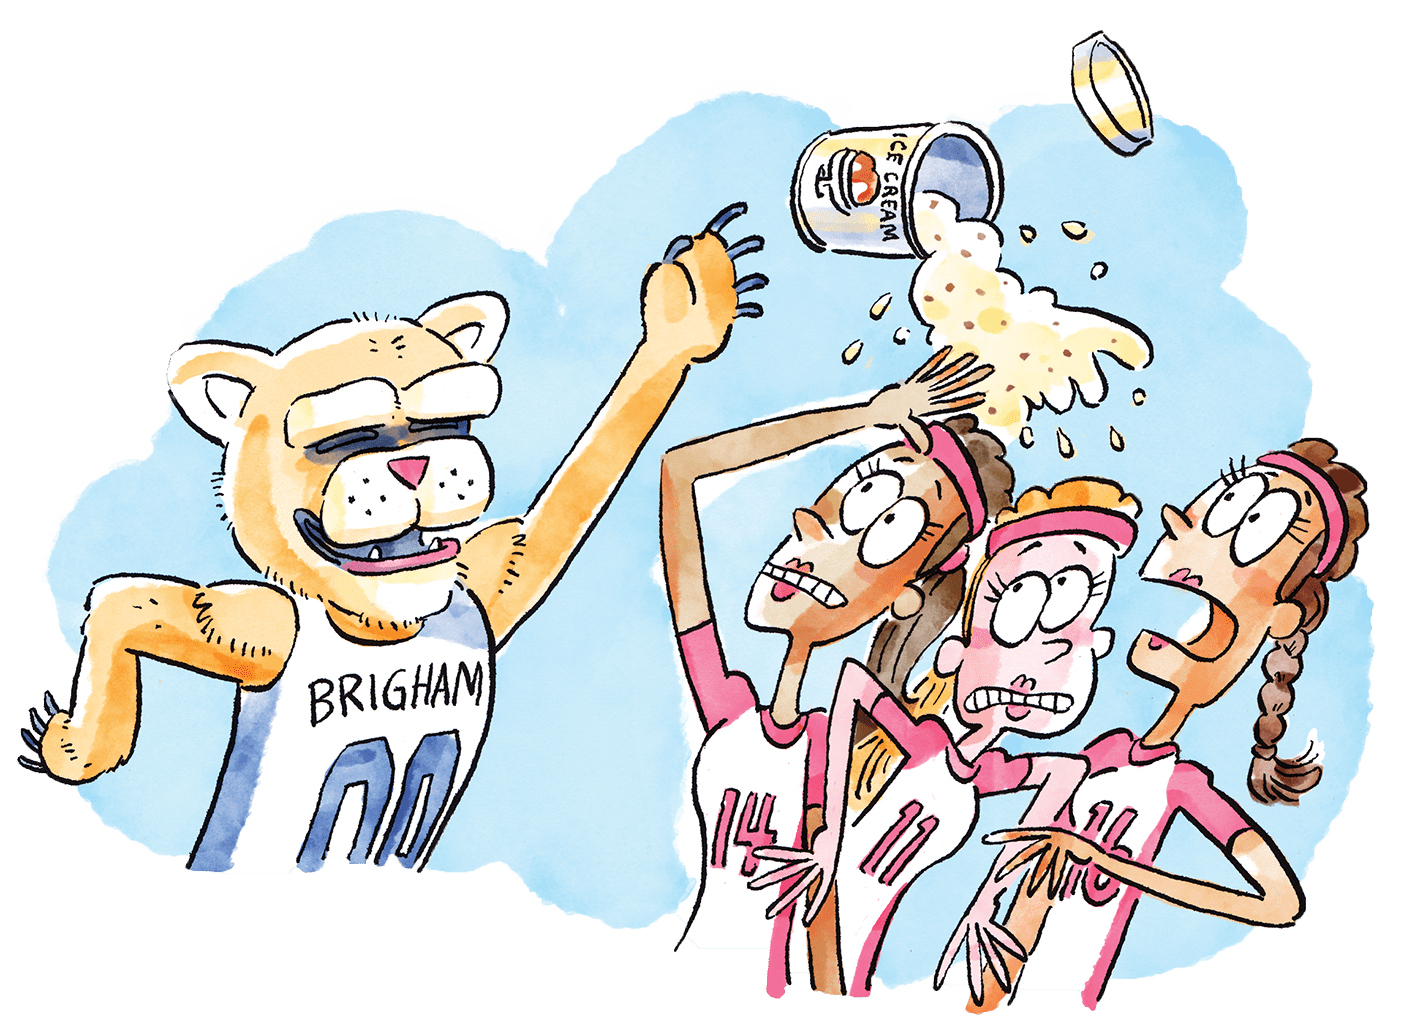 Illustration of Cosmo the Cougar as he attempts to throw a pint of BYU Creamery ice cream to jubilant fans in the Smith Fieldhouse, but the melted product opens and showers members of the opposing women's volleyball team.